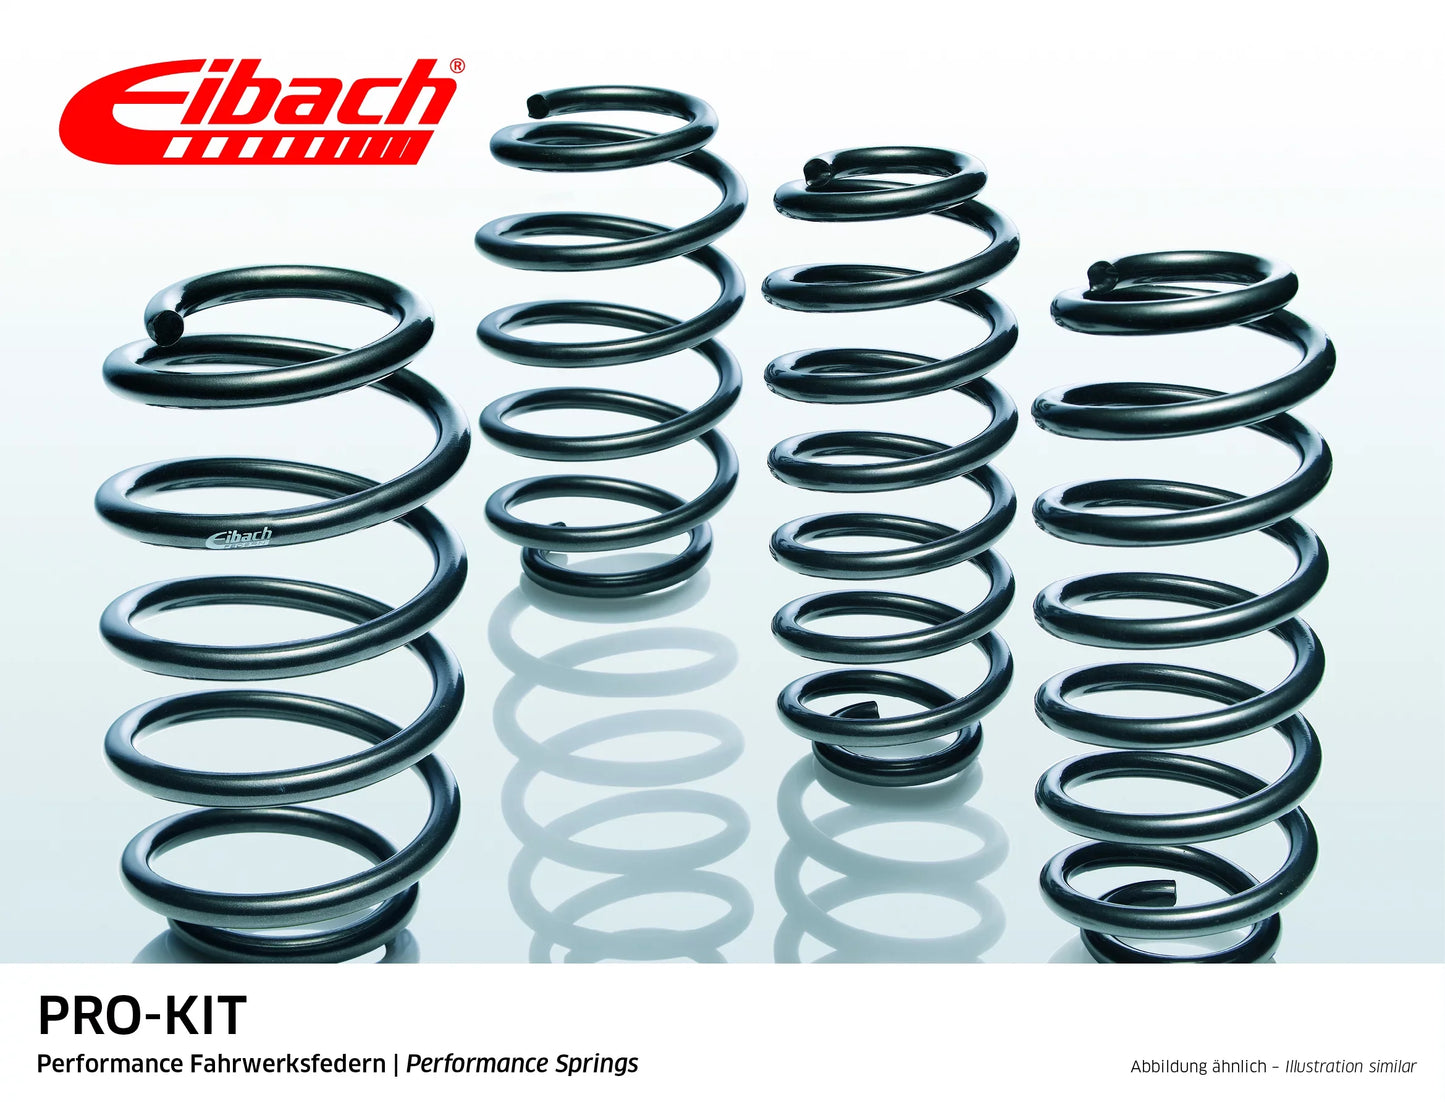 Eibach Pro-Kit Lowering Springs (E10-20-032-01-22) at £356.79